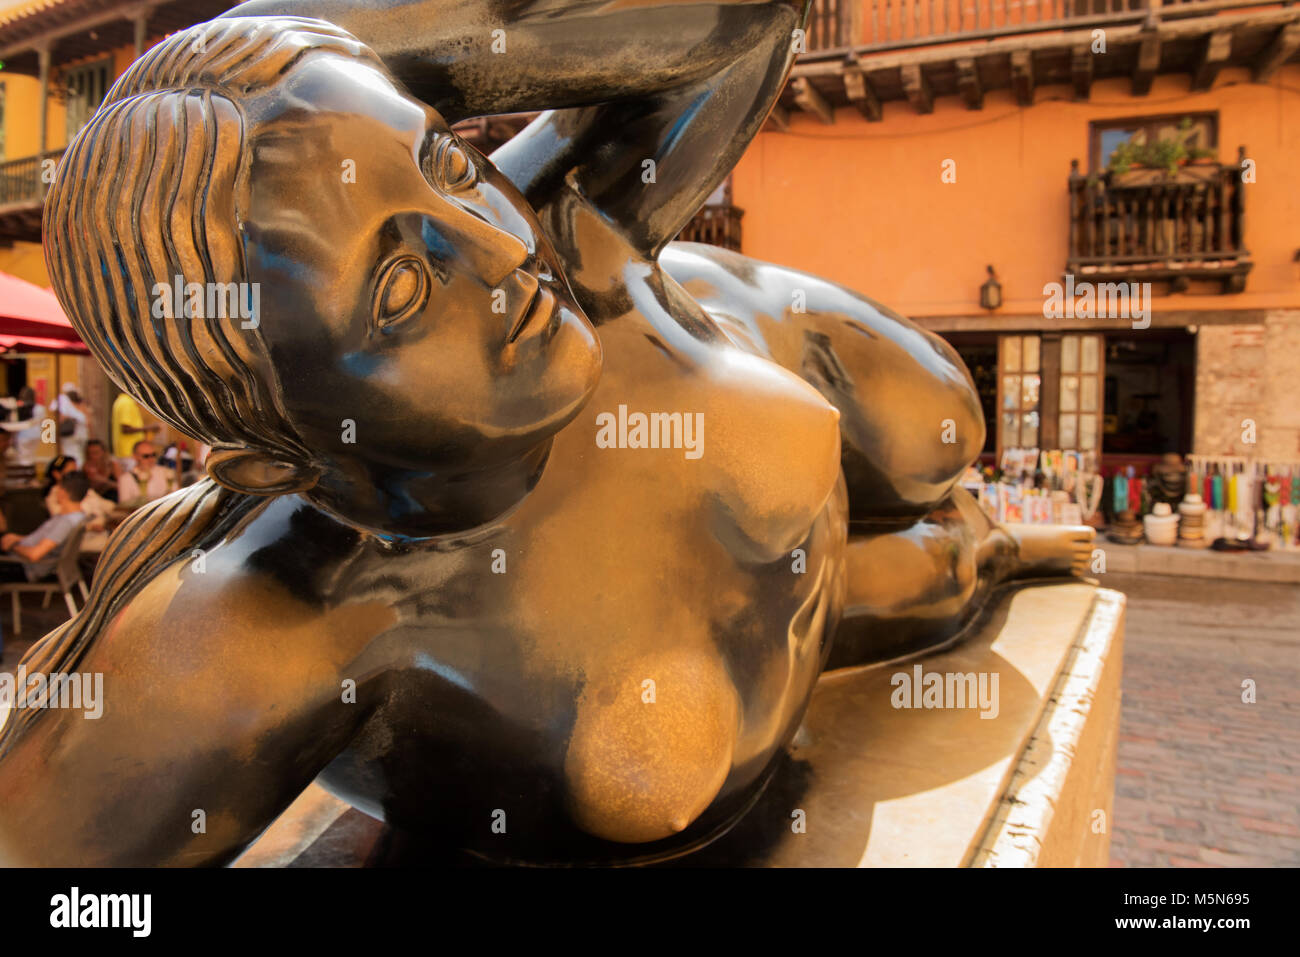 The 'fat lady' sculpture by Fernando Botero in Cartegena, Colombia Stock Photo